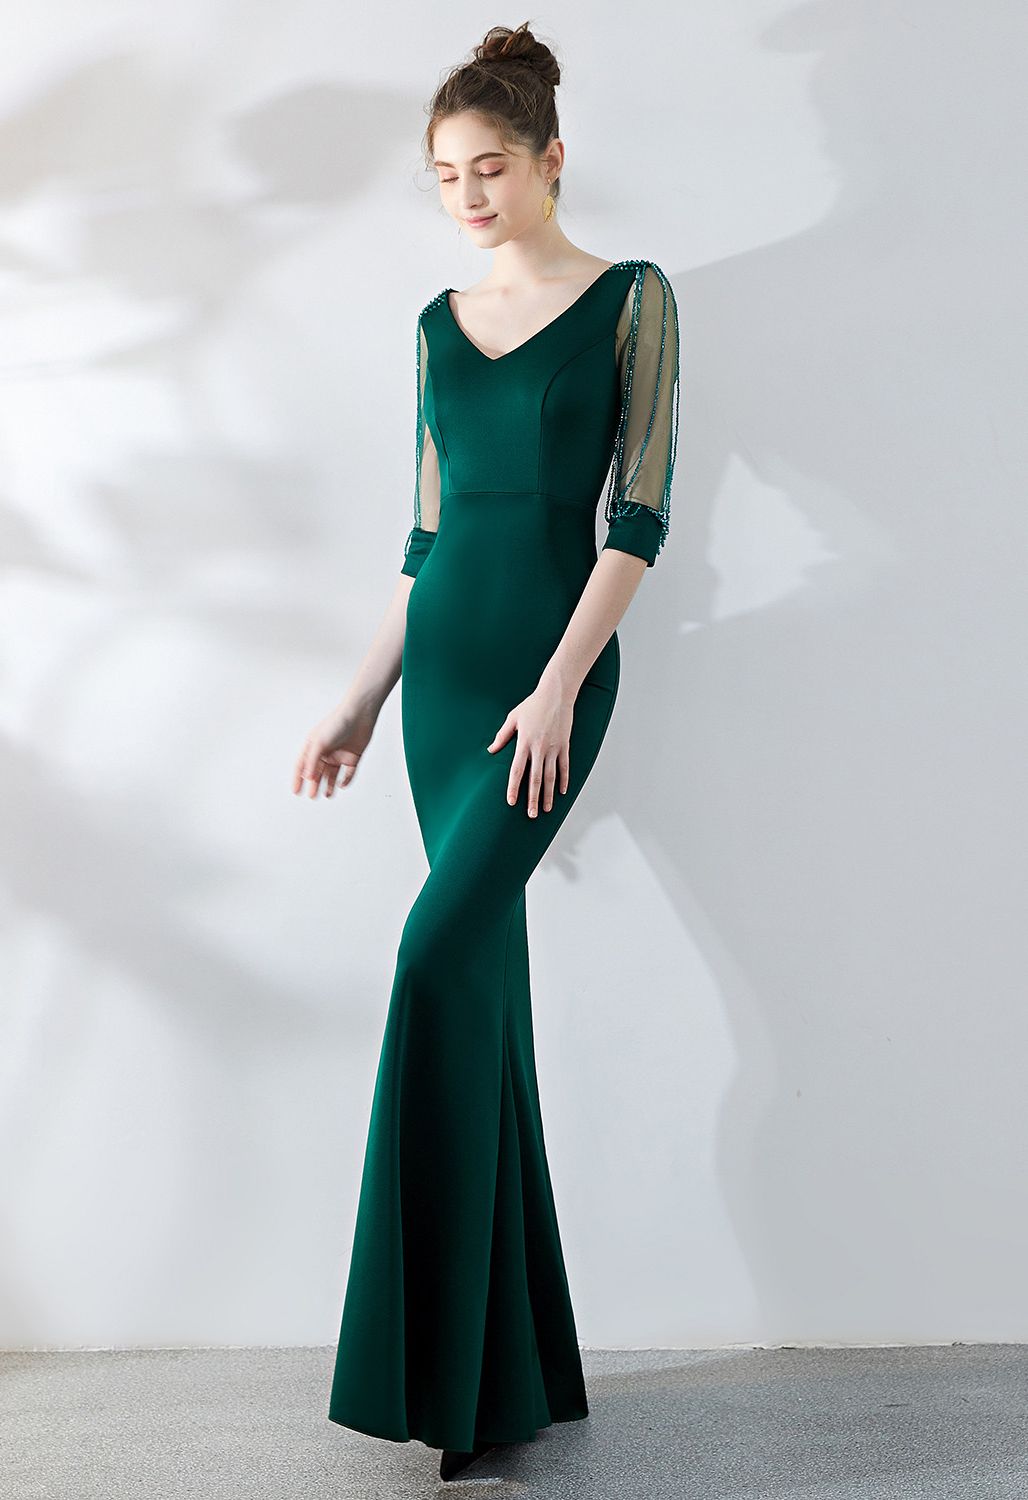 Draped Bead Mesh Sleeve Gown in Emerald - Retro, Indie and Unique Fashion